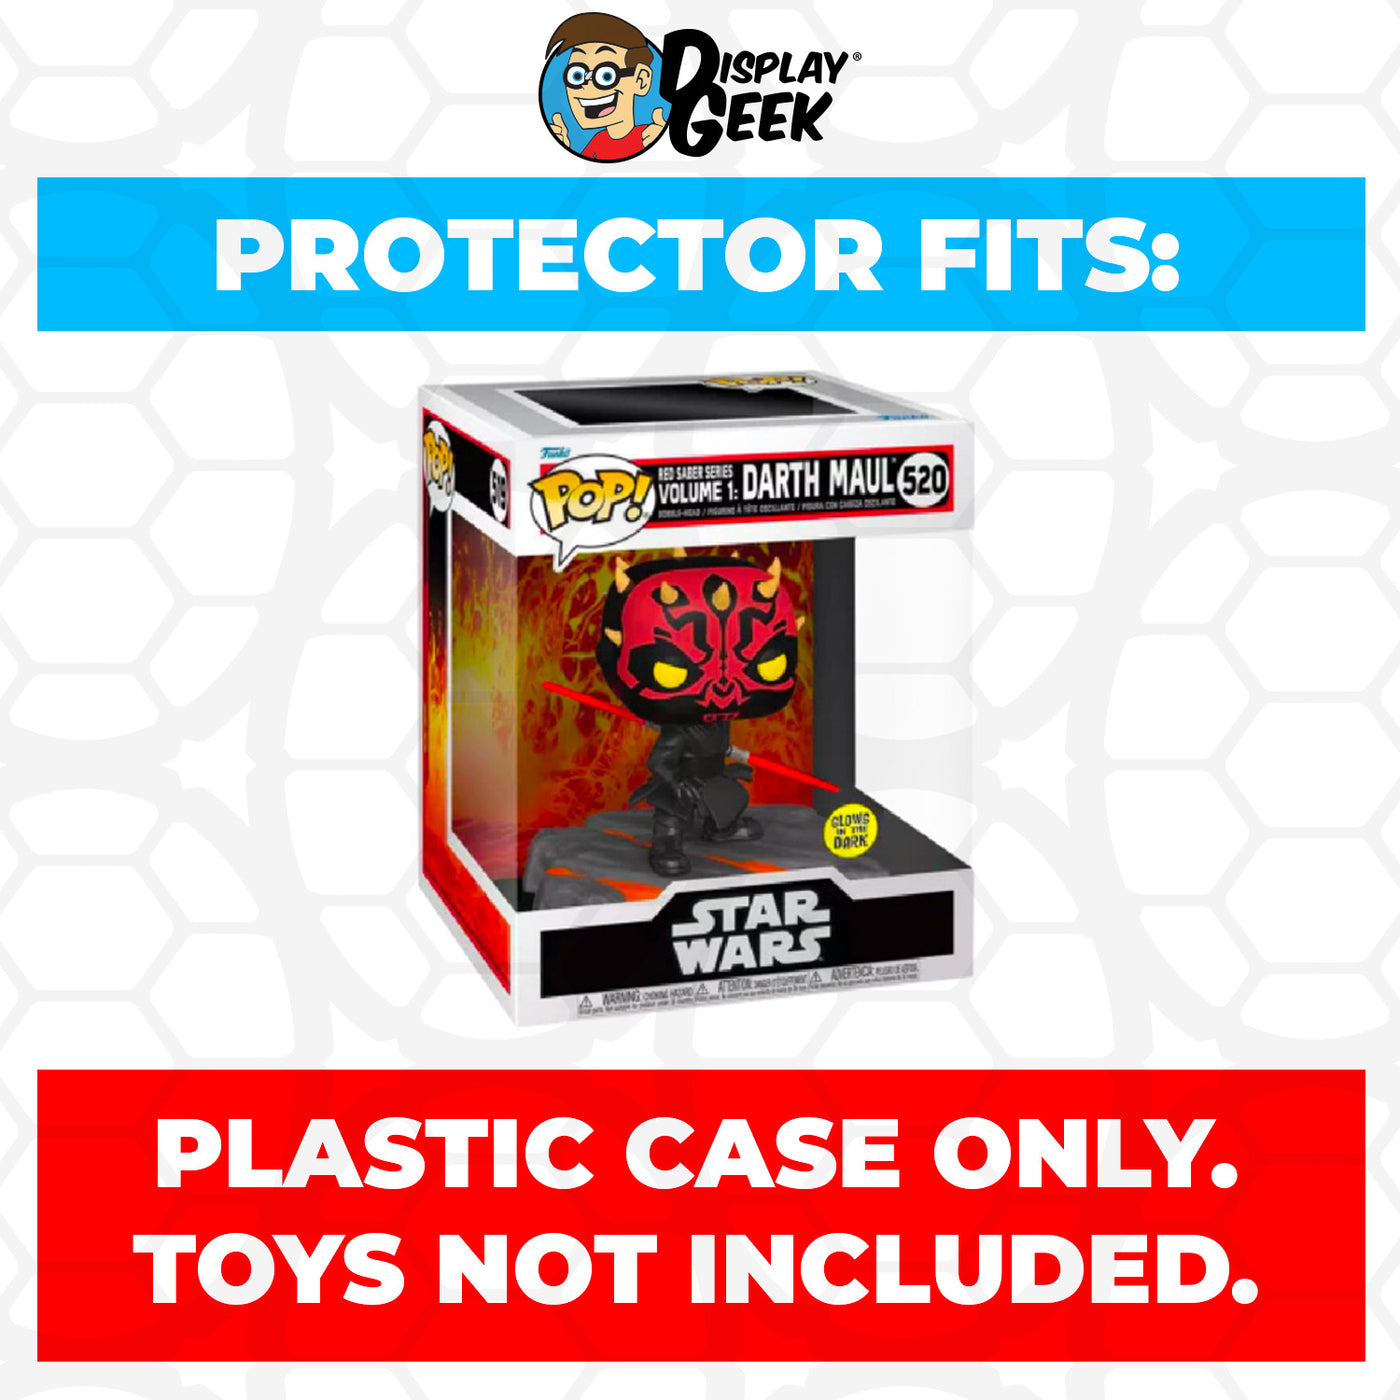 Pop Protector for Red Saber Series Volume 1 Darth Maul Glow #520 Funko Pop Deluxe on The Protector Guide App by Display Geek